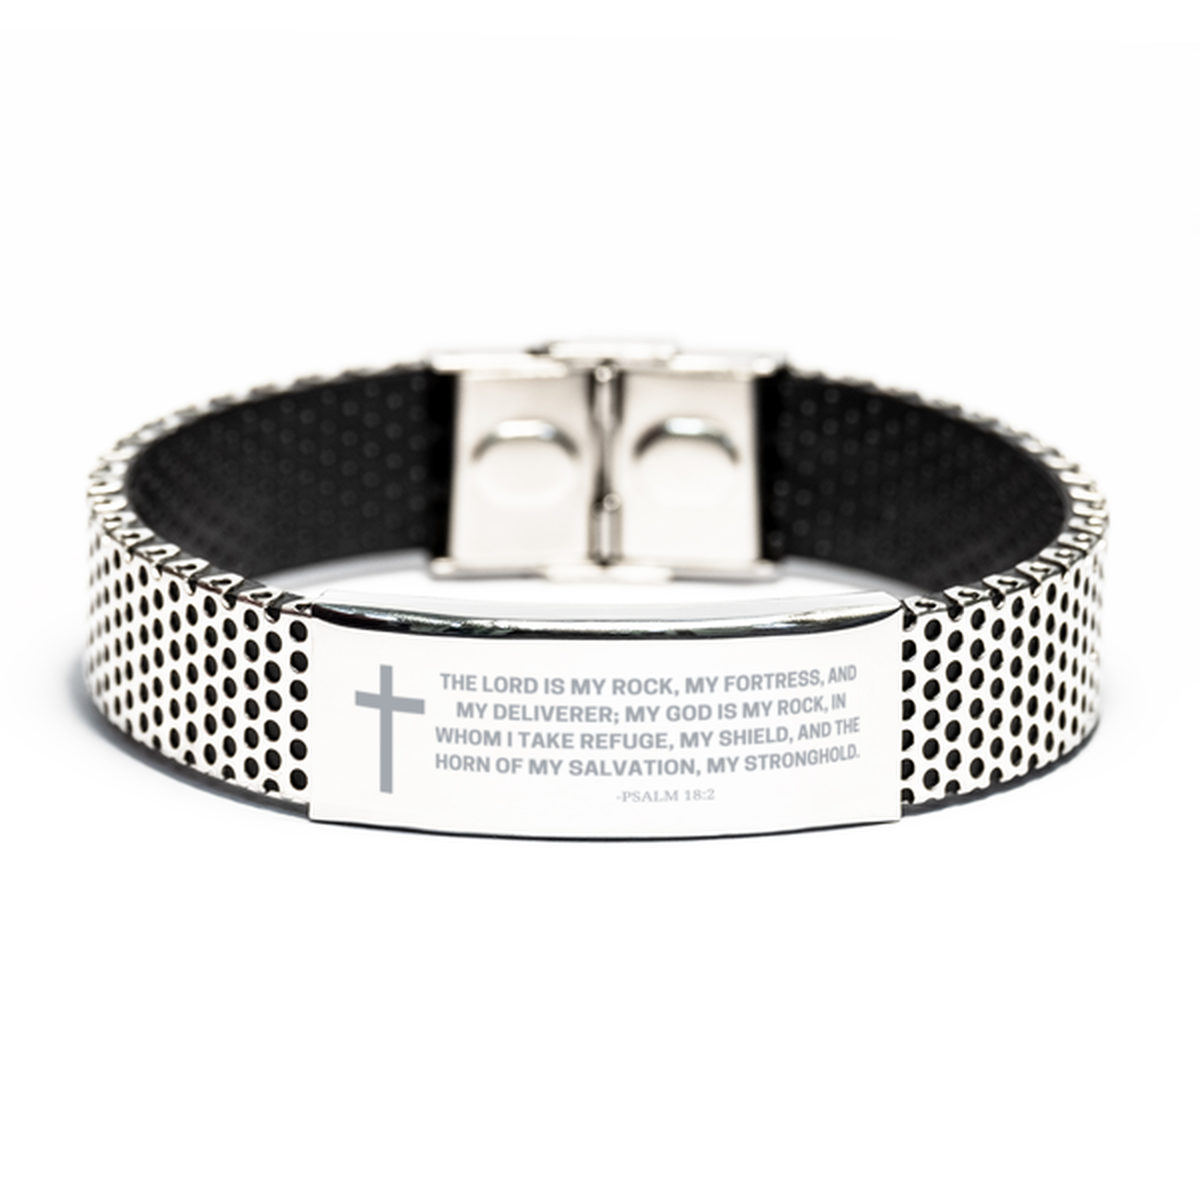 Baptism Gifts For Teenage Boys Girls, Christian Bible Verse Stainless Steel Bracelet, The Lord is my rock, Catholic Confirmation Gifts for Son, Godson, Grandson, Nephew